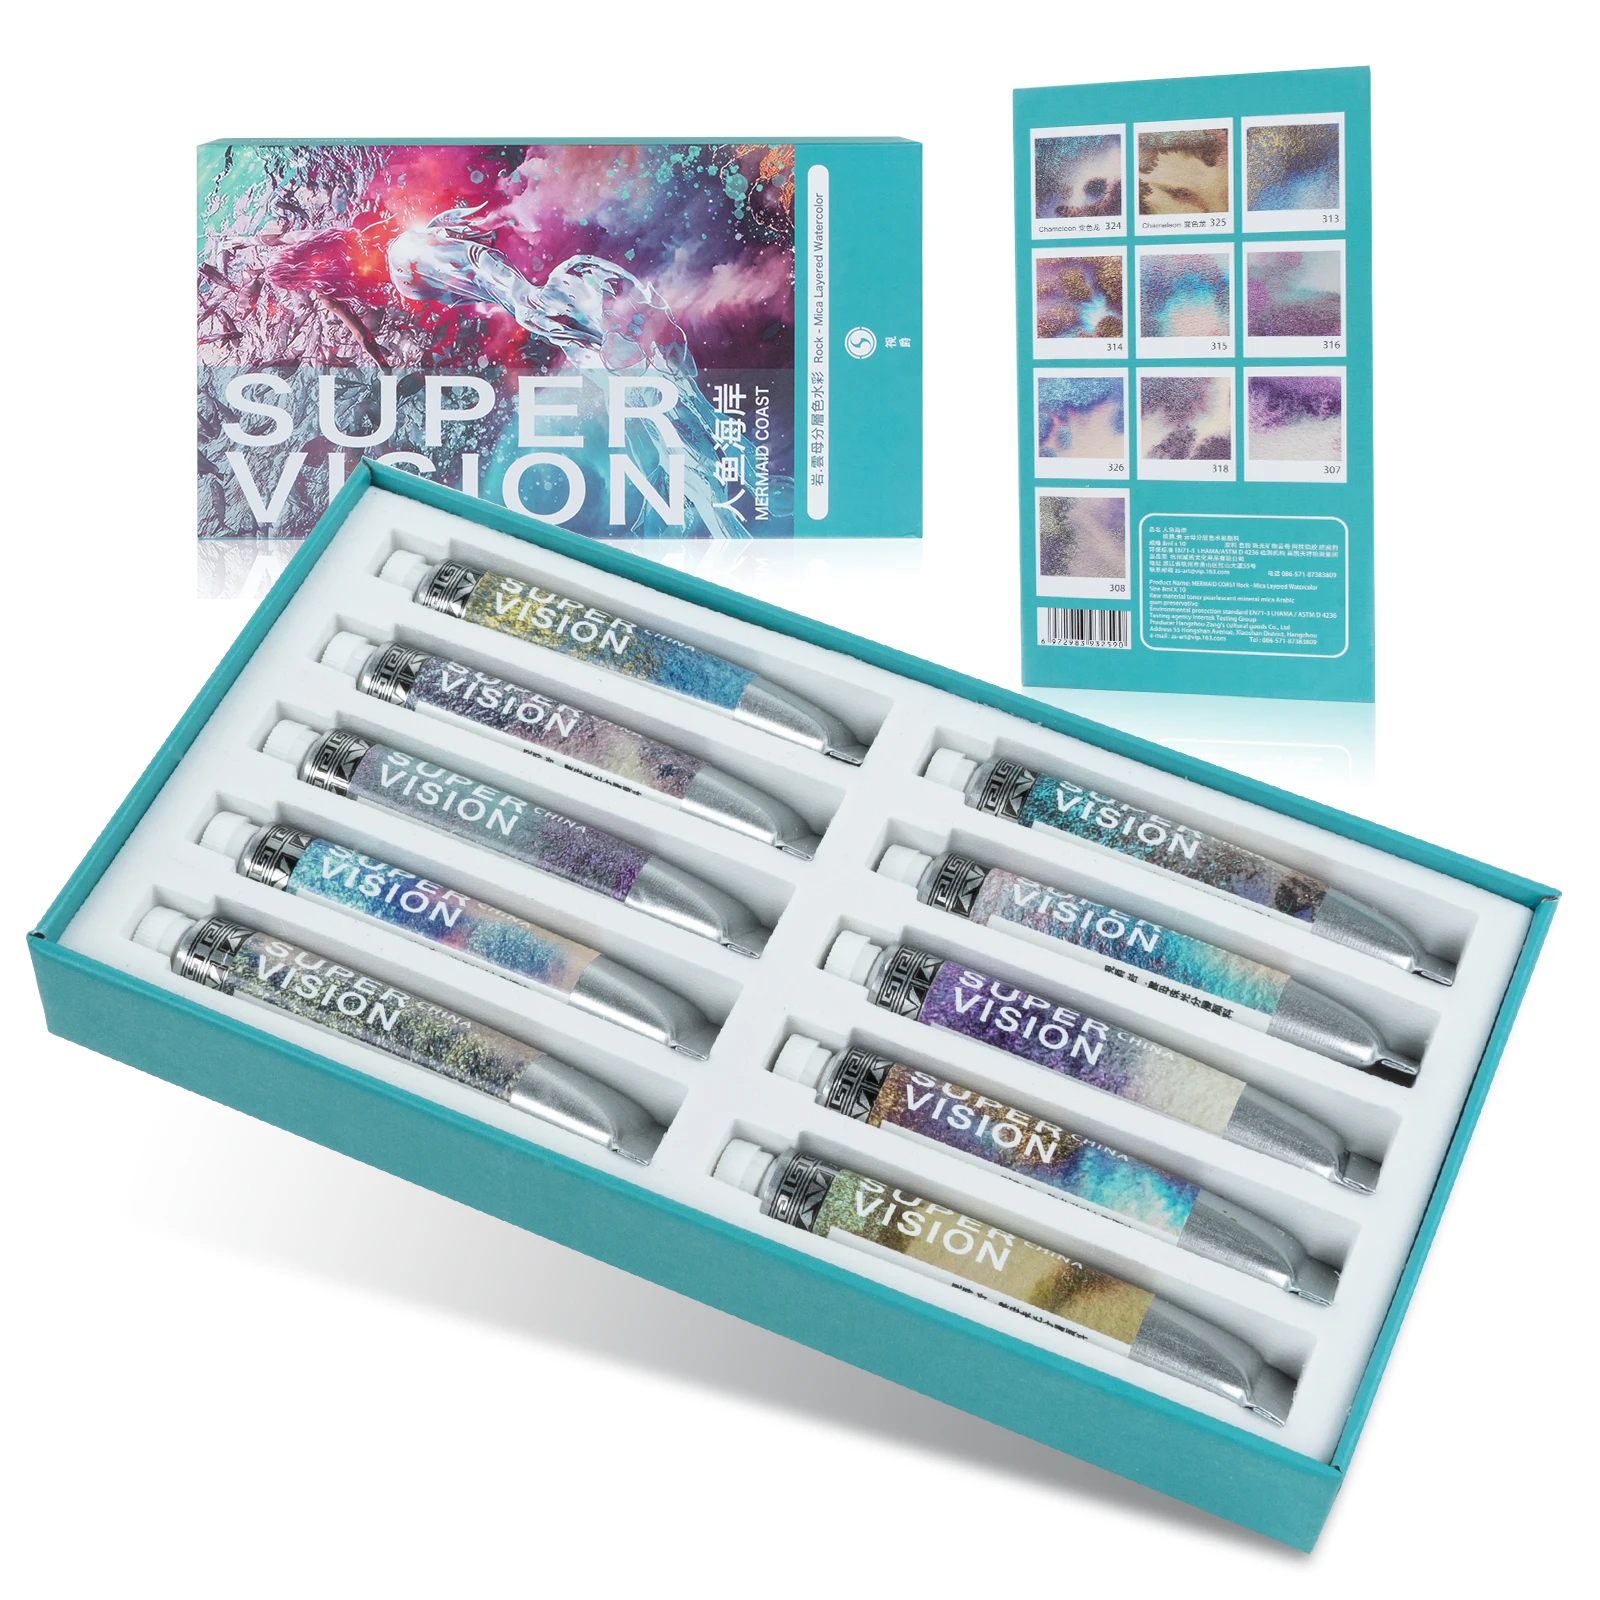 Super Vision Chameleon Rock-Mica Layered Watercolor Paint 10 Pearlescent Colors 8ML Tube with Portable and Delicate Box Set A